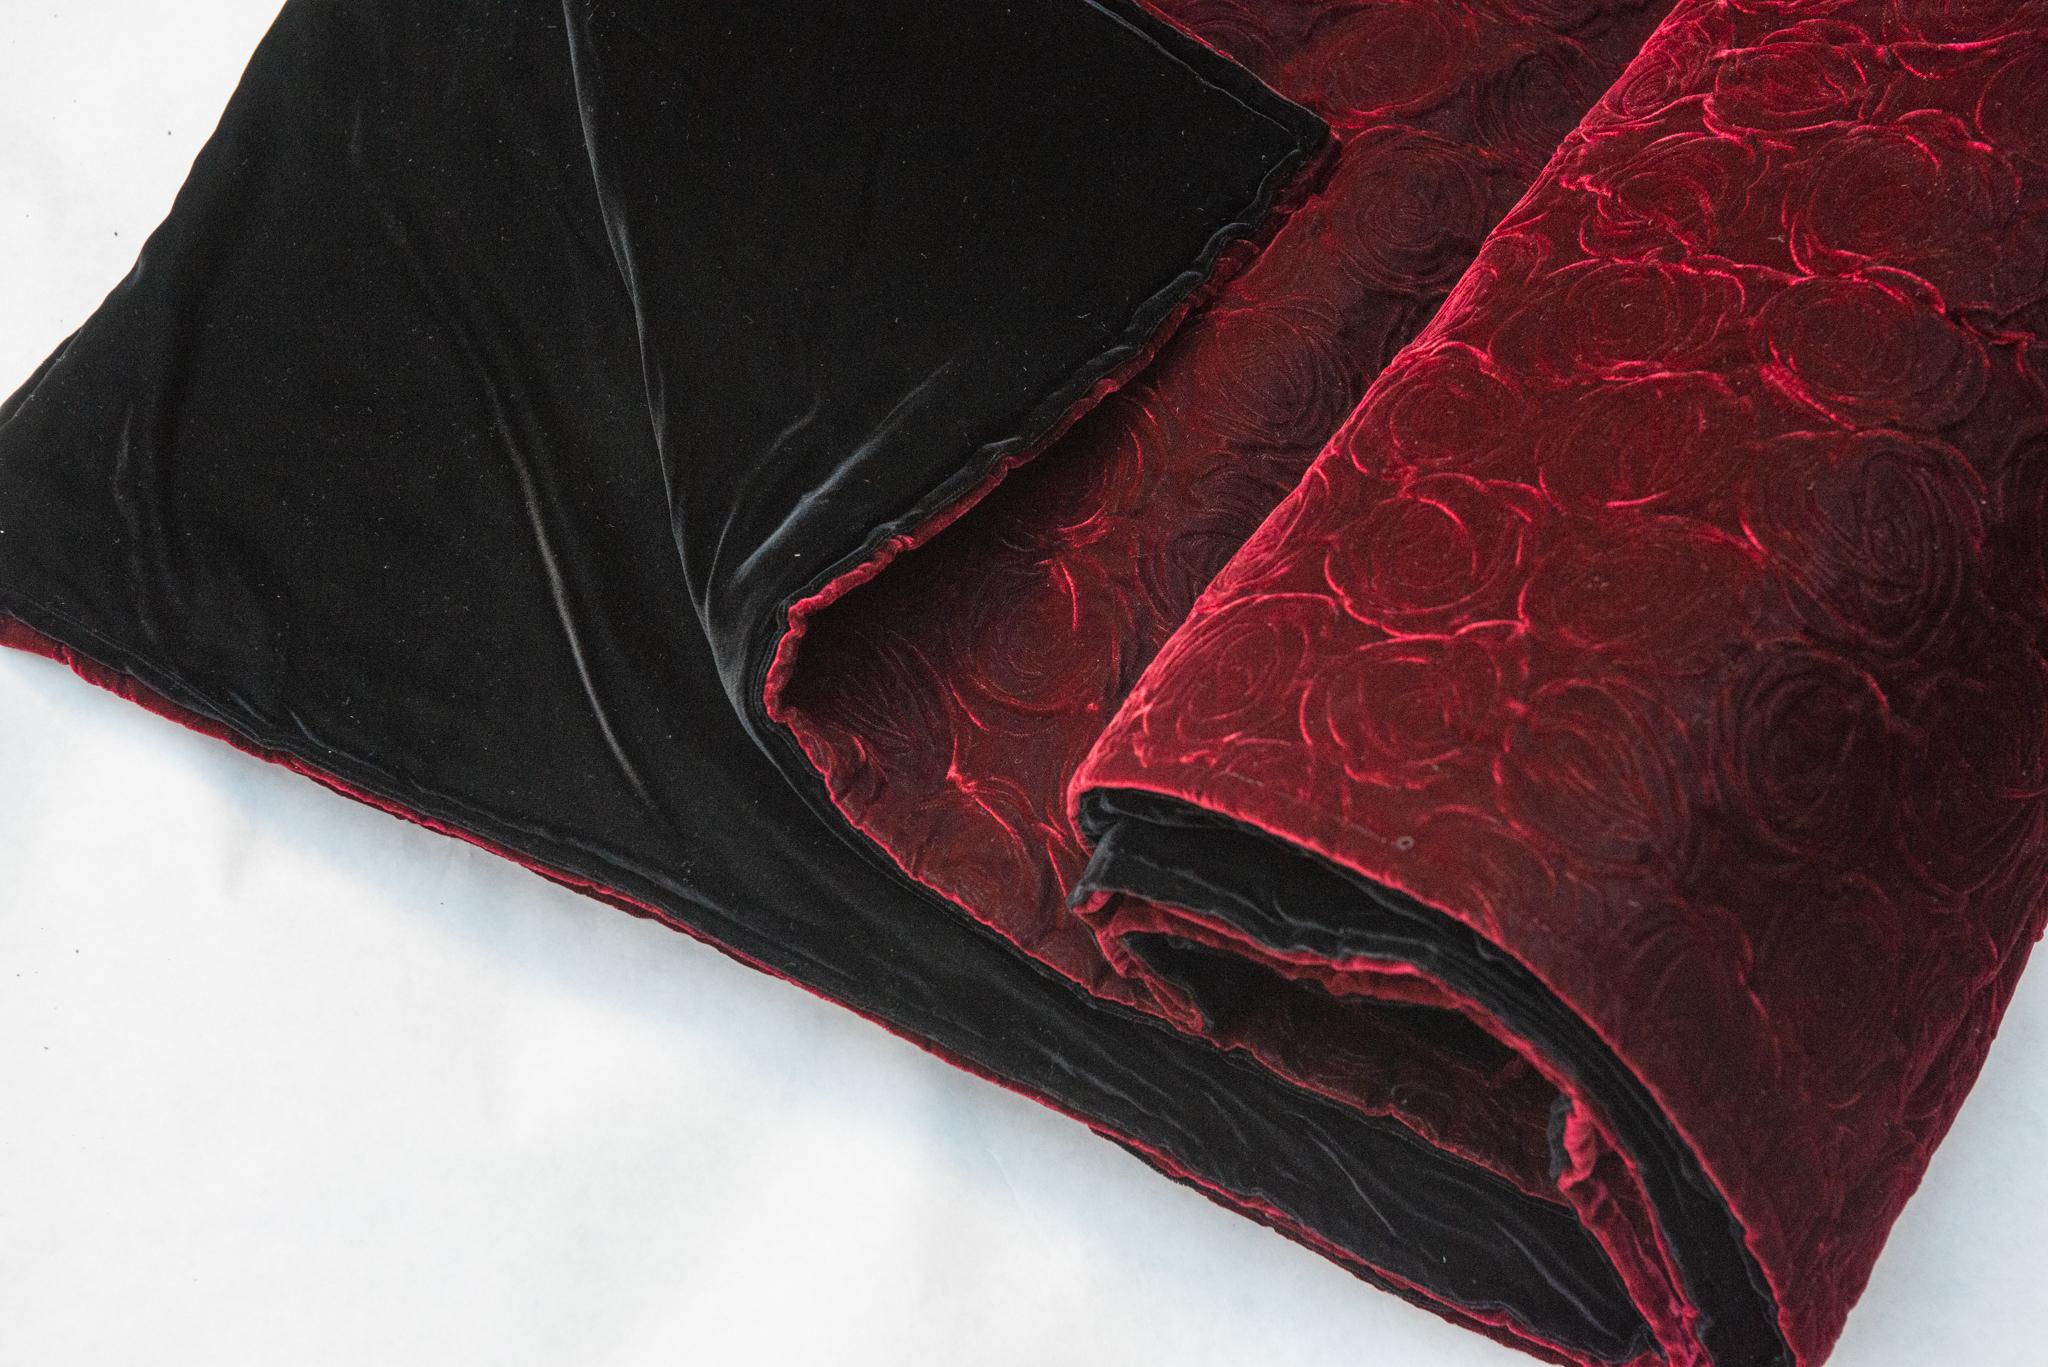 Velvet blanket very special and unusual, it is made by purple-red velvet roses. The color changes according to how you move the blanket: dark red takes on bright shades. It is very beautiful and elegant, but it was difficult to photograph it. It has